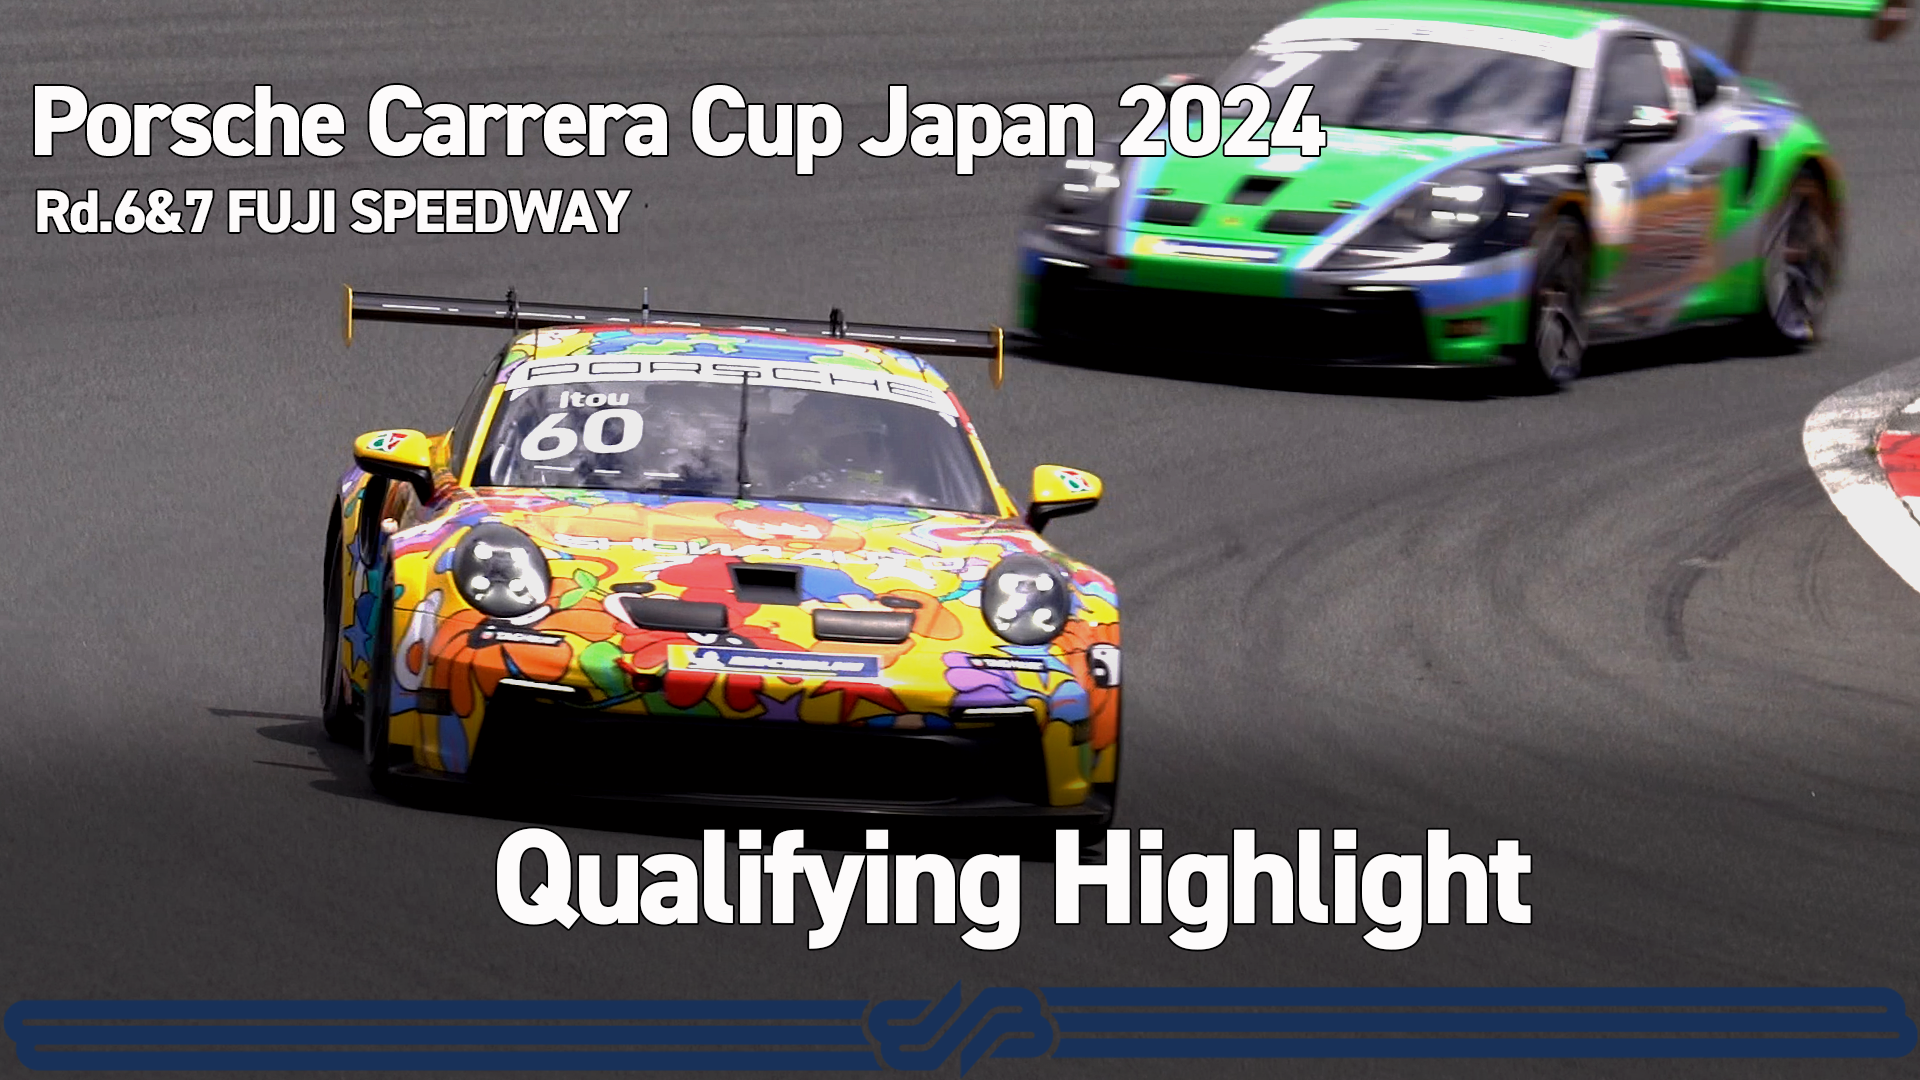 【Porsche Carrera Cup Japan 2024 】Rd.6-7 Qualifying Result